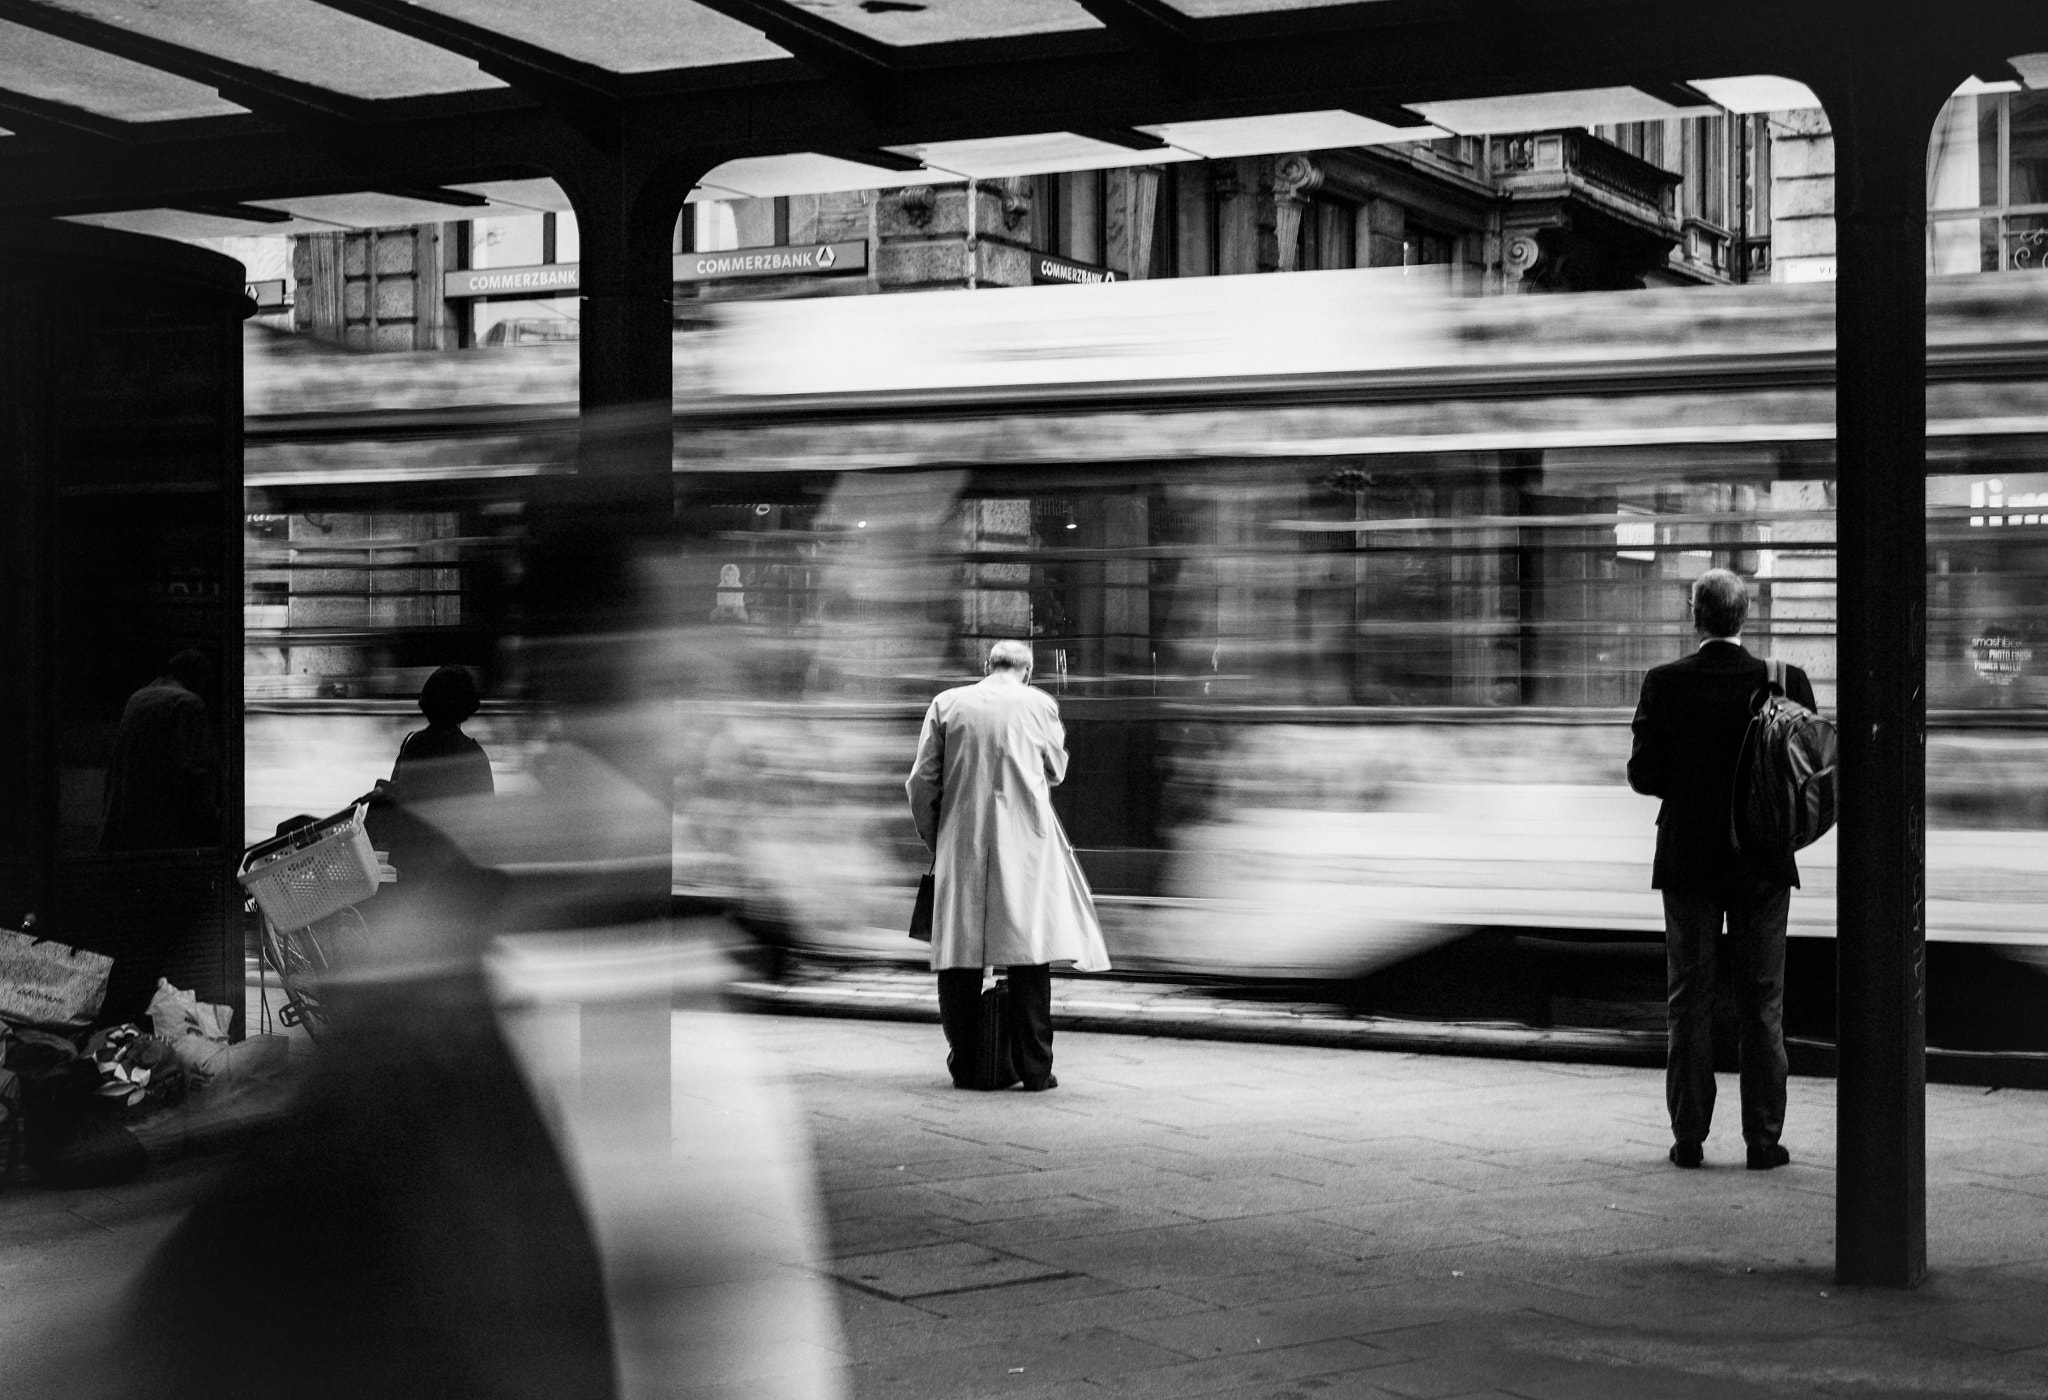 A Simple Secret to Better Street Photography - 500px